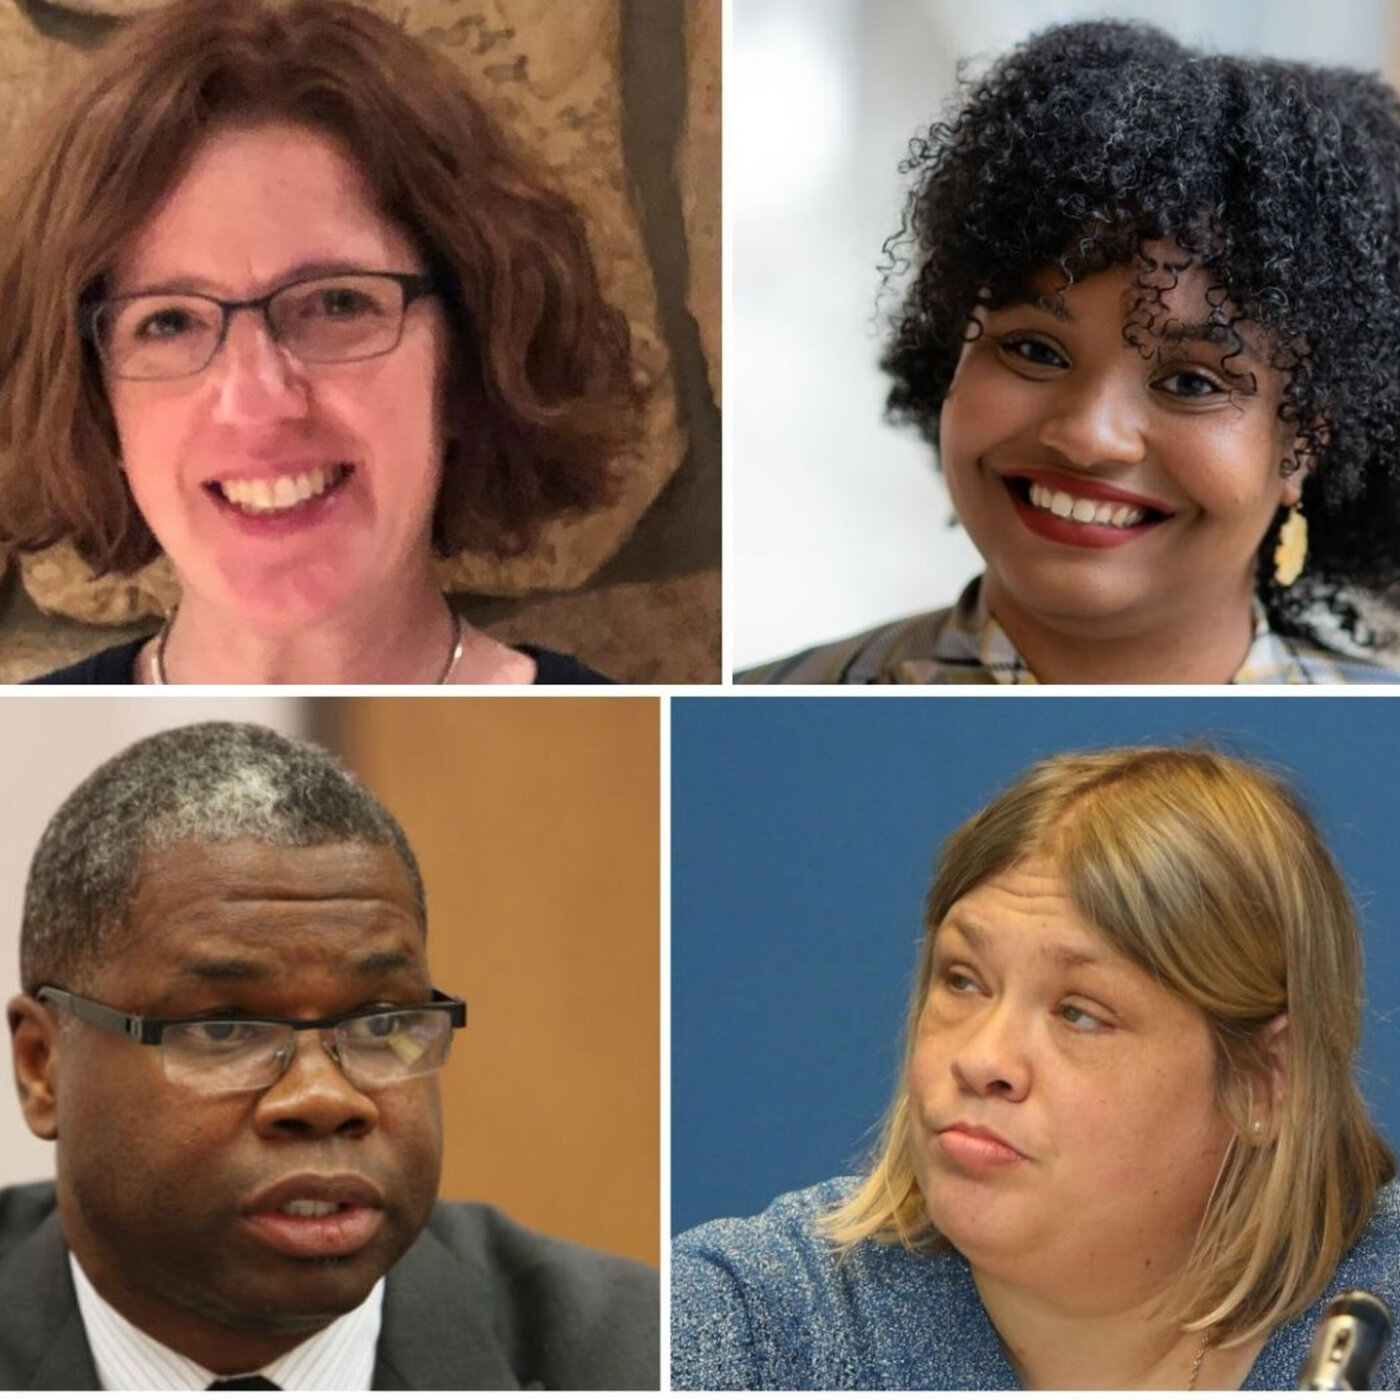 Reading scores, cops and the coronavirus shape the April 7 elections for Madison School Board